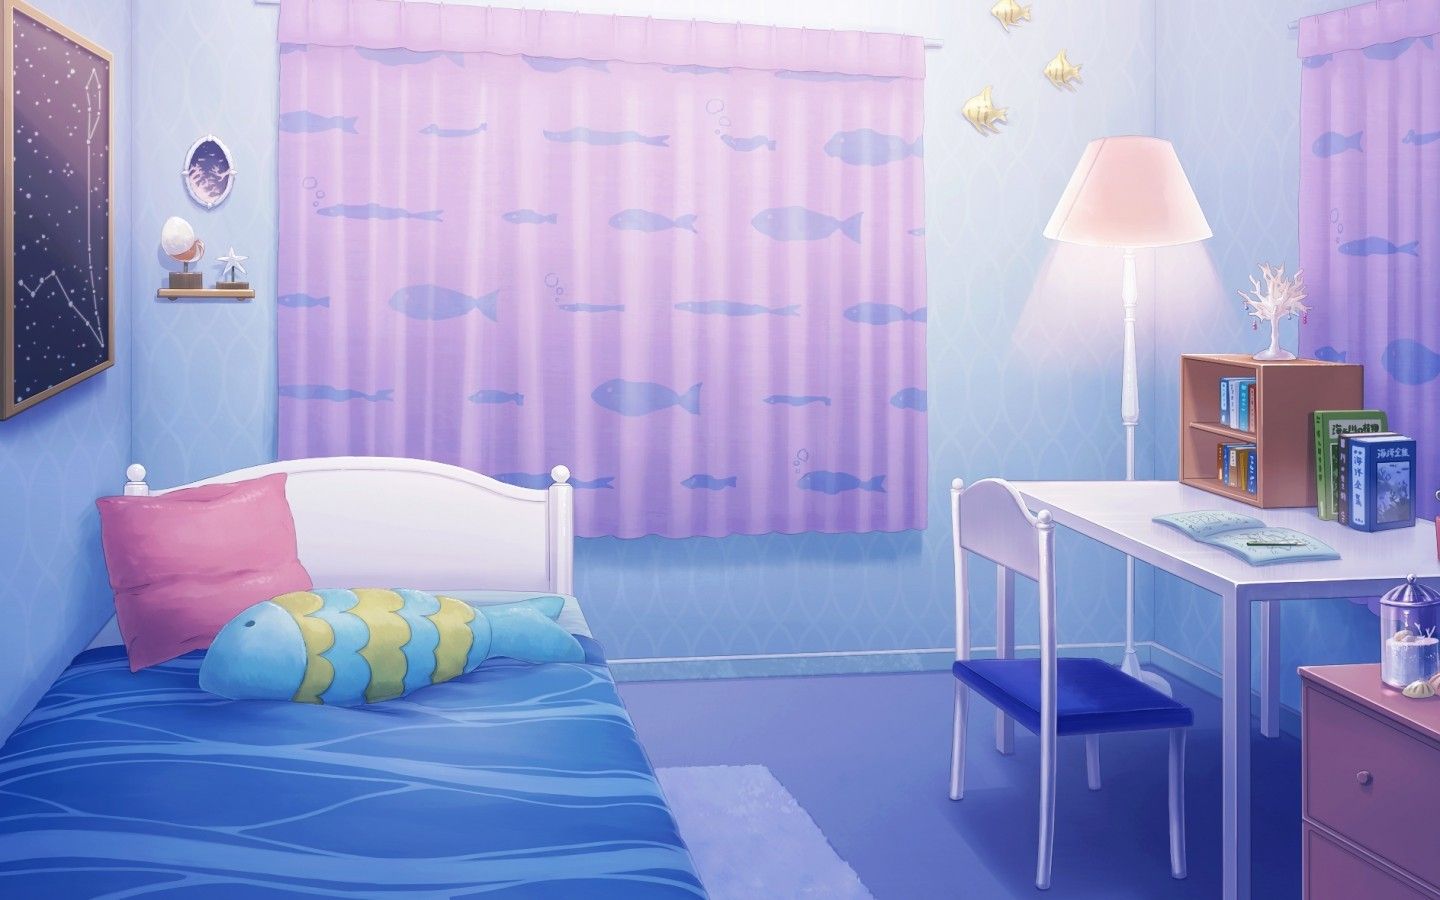 Download 1440x900 Anime Room, Bed, Desk, Curtains, Cute Wallpaper